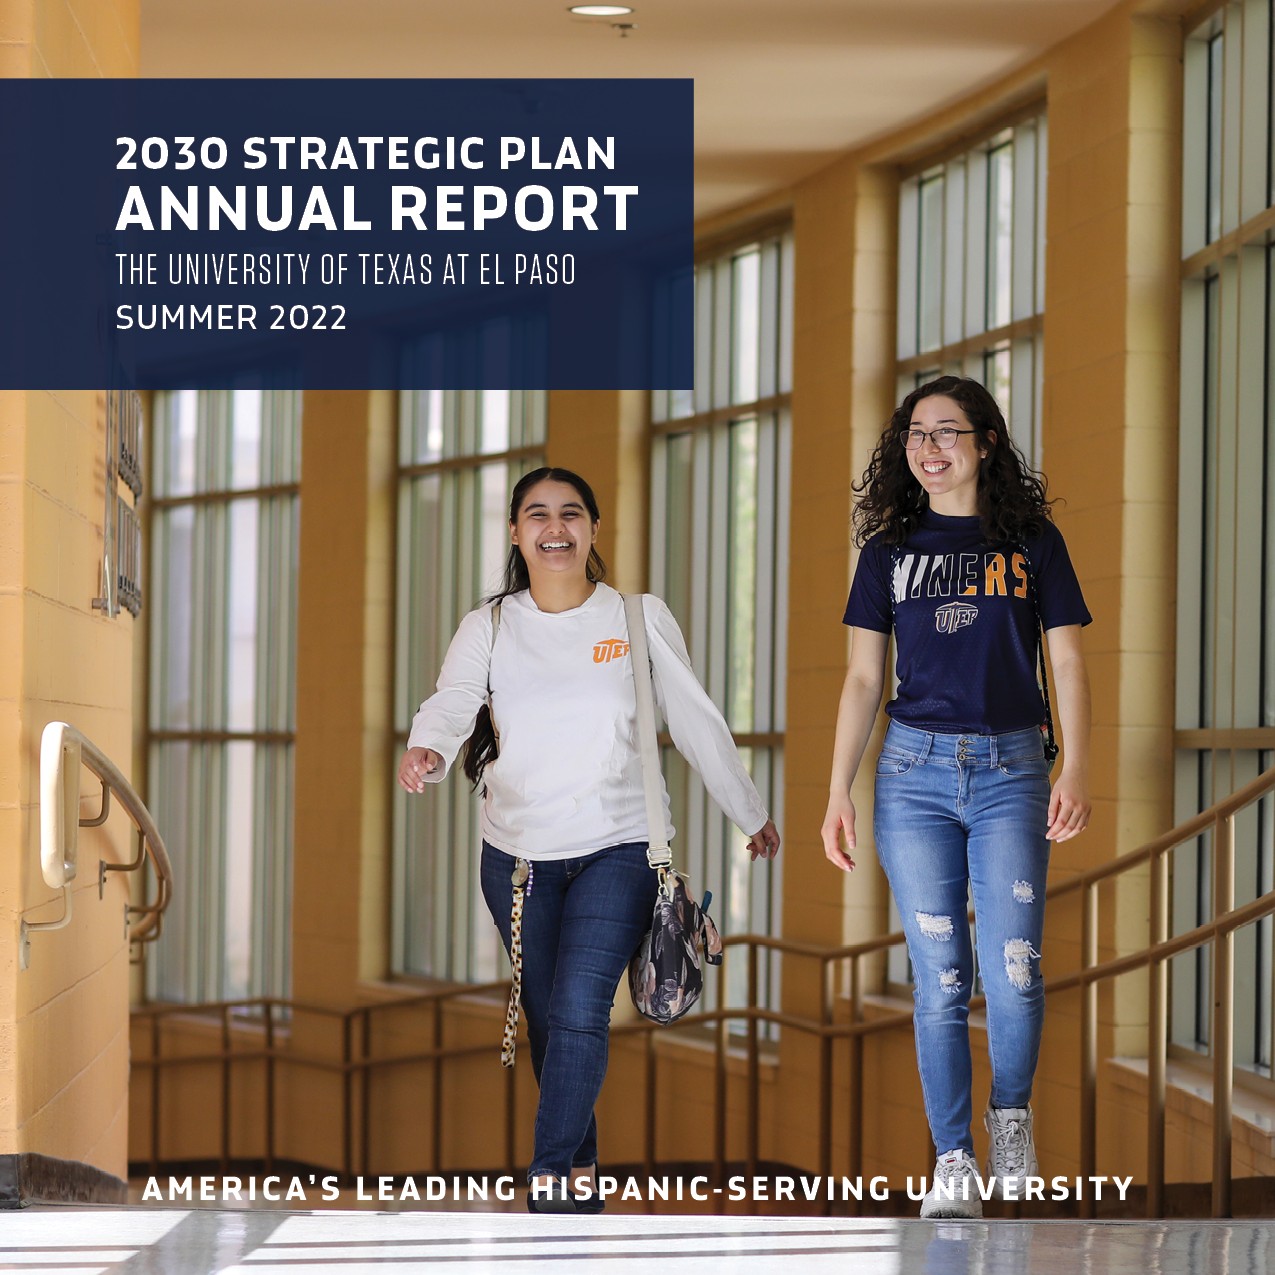 One year ago, we launched UTEP’s 2030 Strategic Plan after a 15-month planning process. The document that emerged from that process focused on the University’s strategic advantages – our place, our people, our culture of care and our partnerships – and laid out a roadmap to leverage those advantages to achieve four goals during the next decade. 